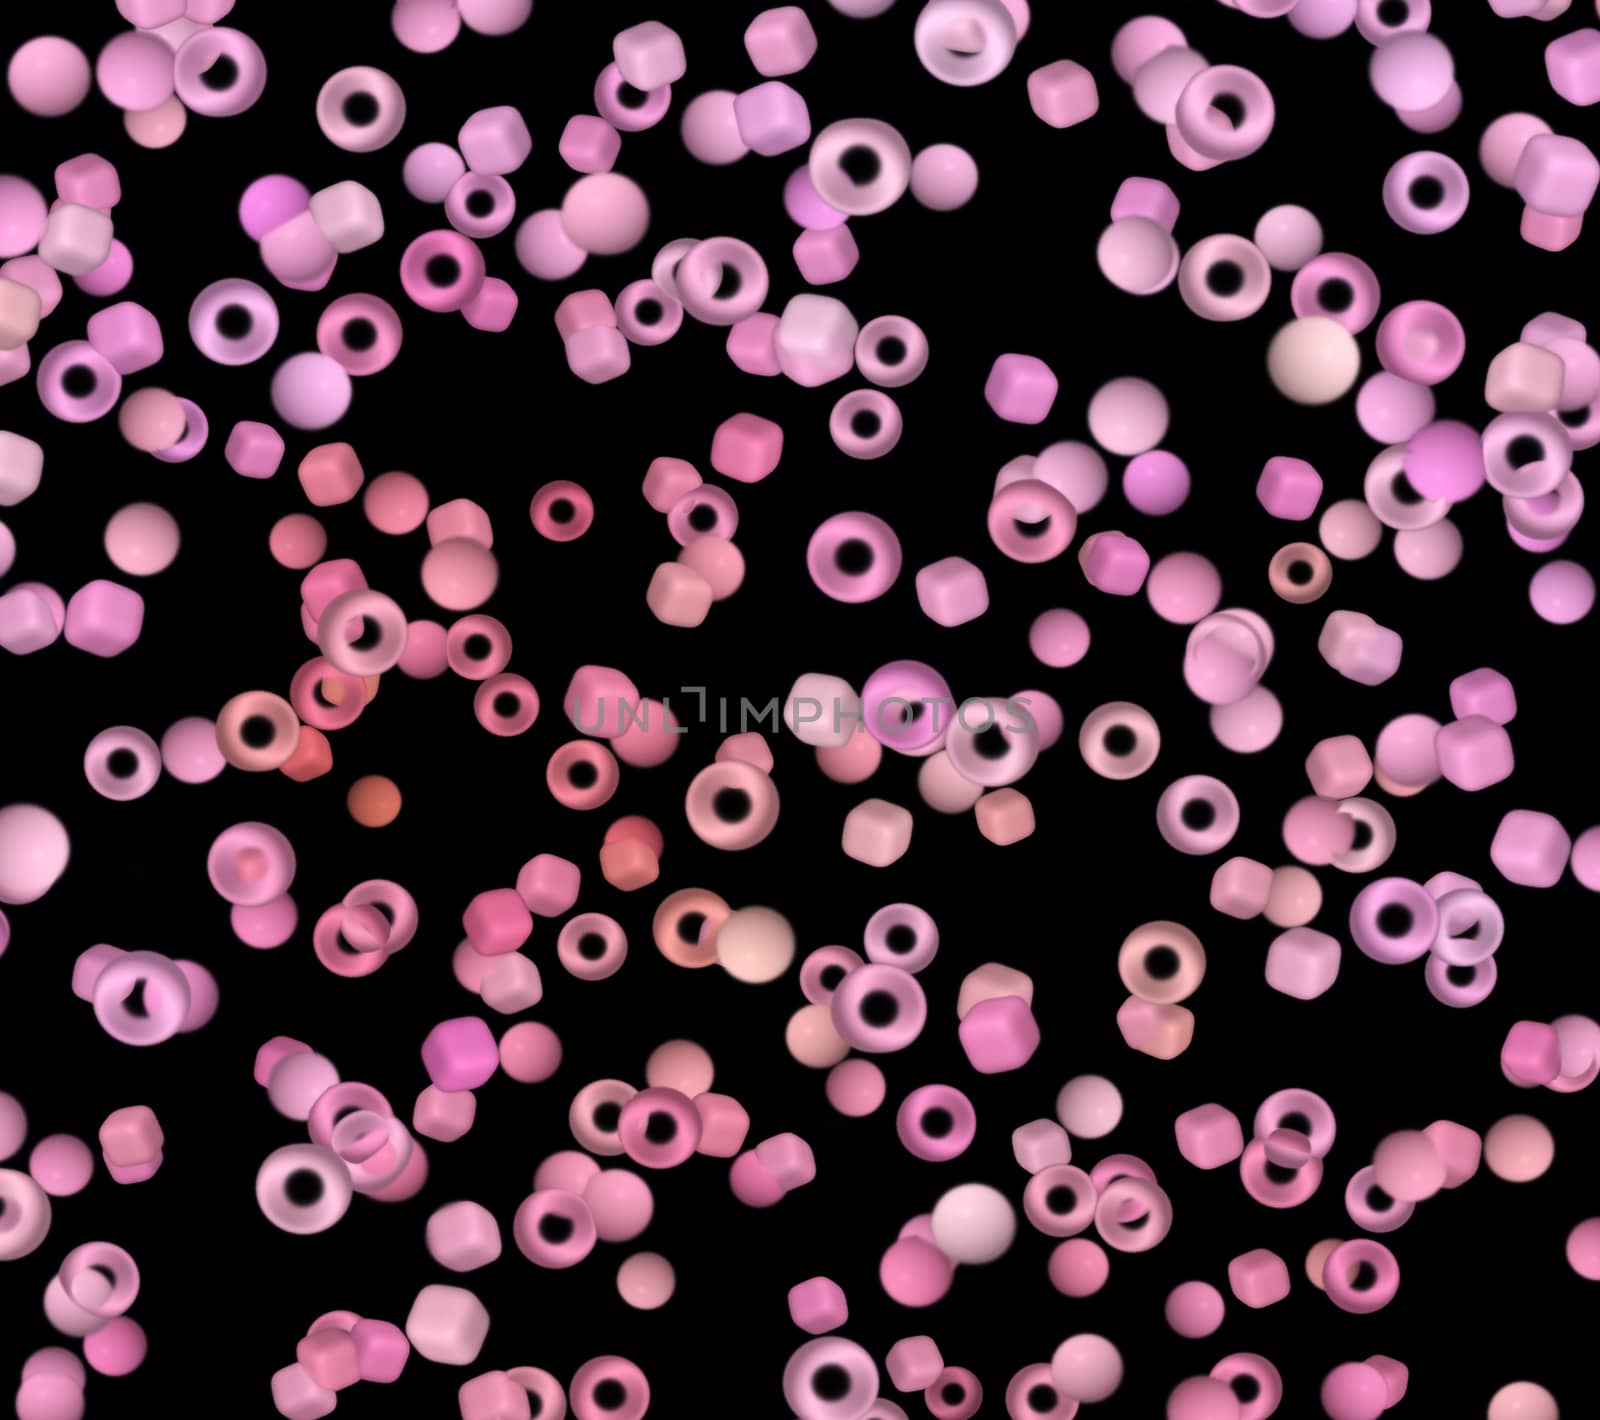 
Abstraction in the form of bulk pink rings and cubes on a black background